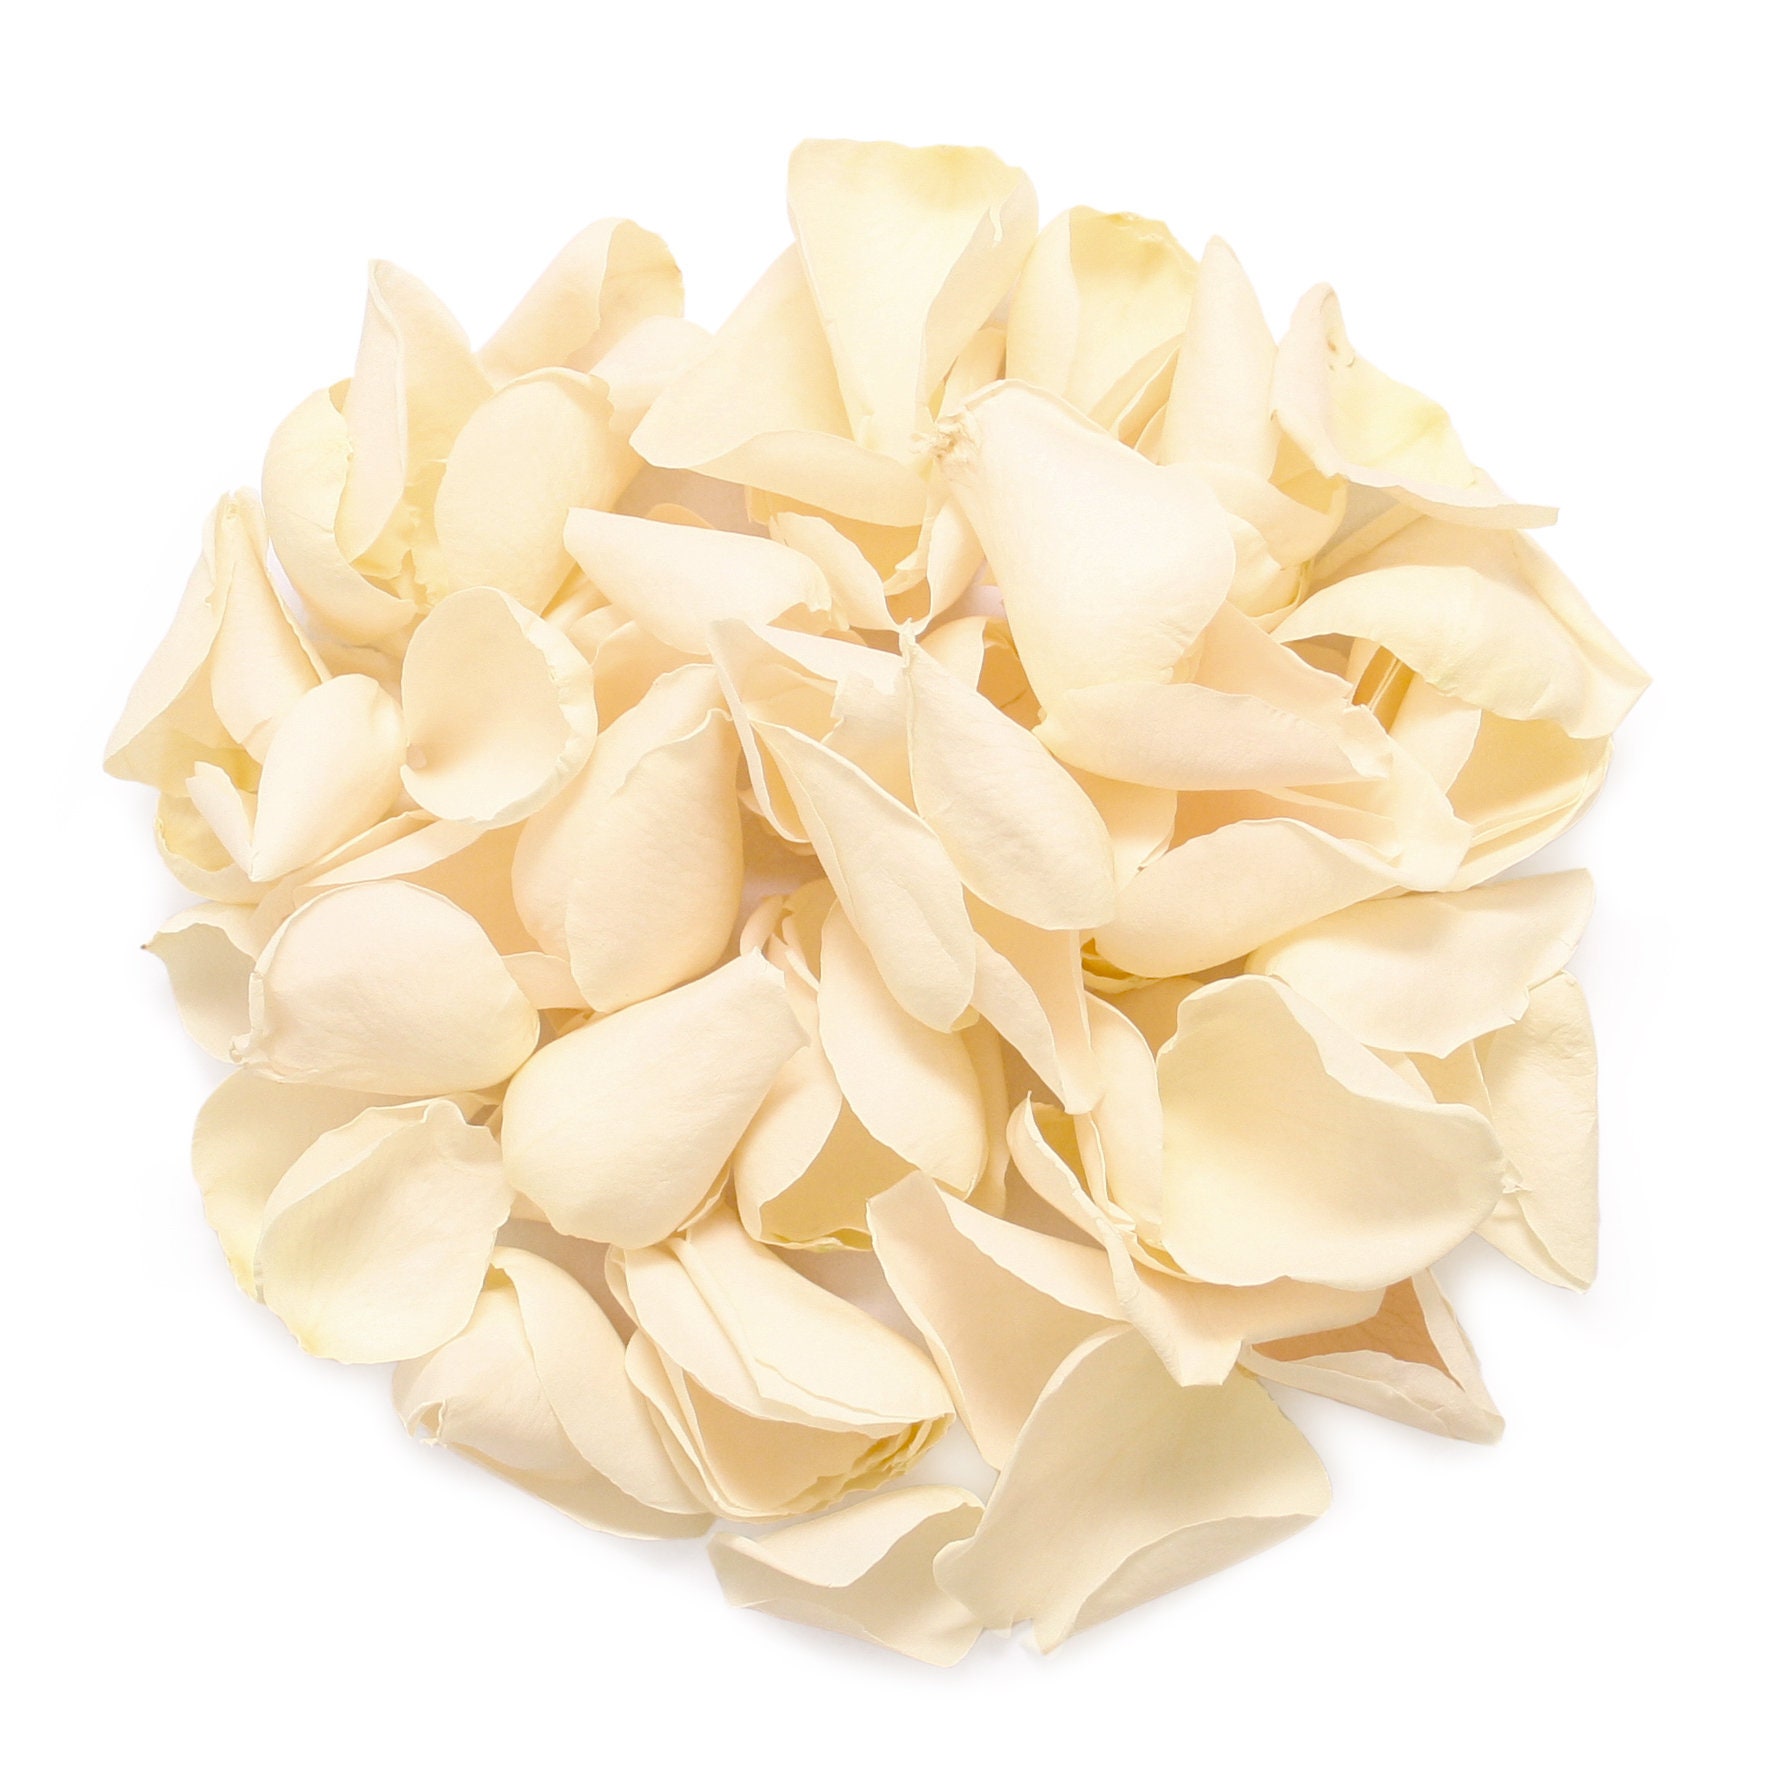 decoration Yellow biodegradable rose petals for wedding confetti 